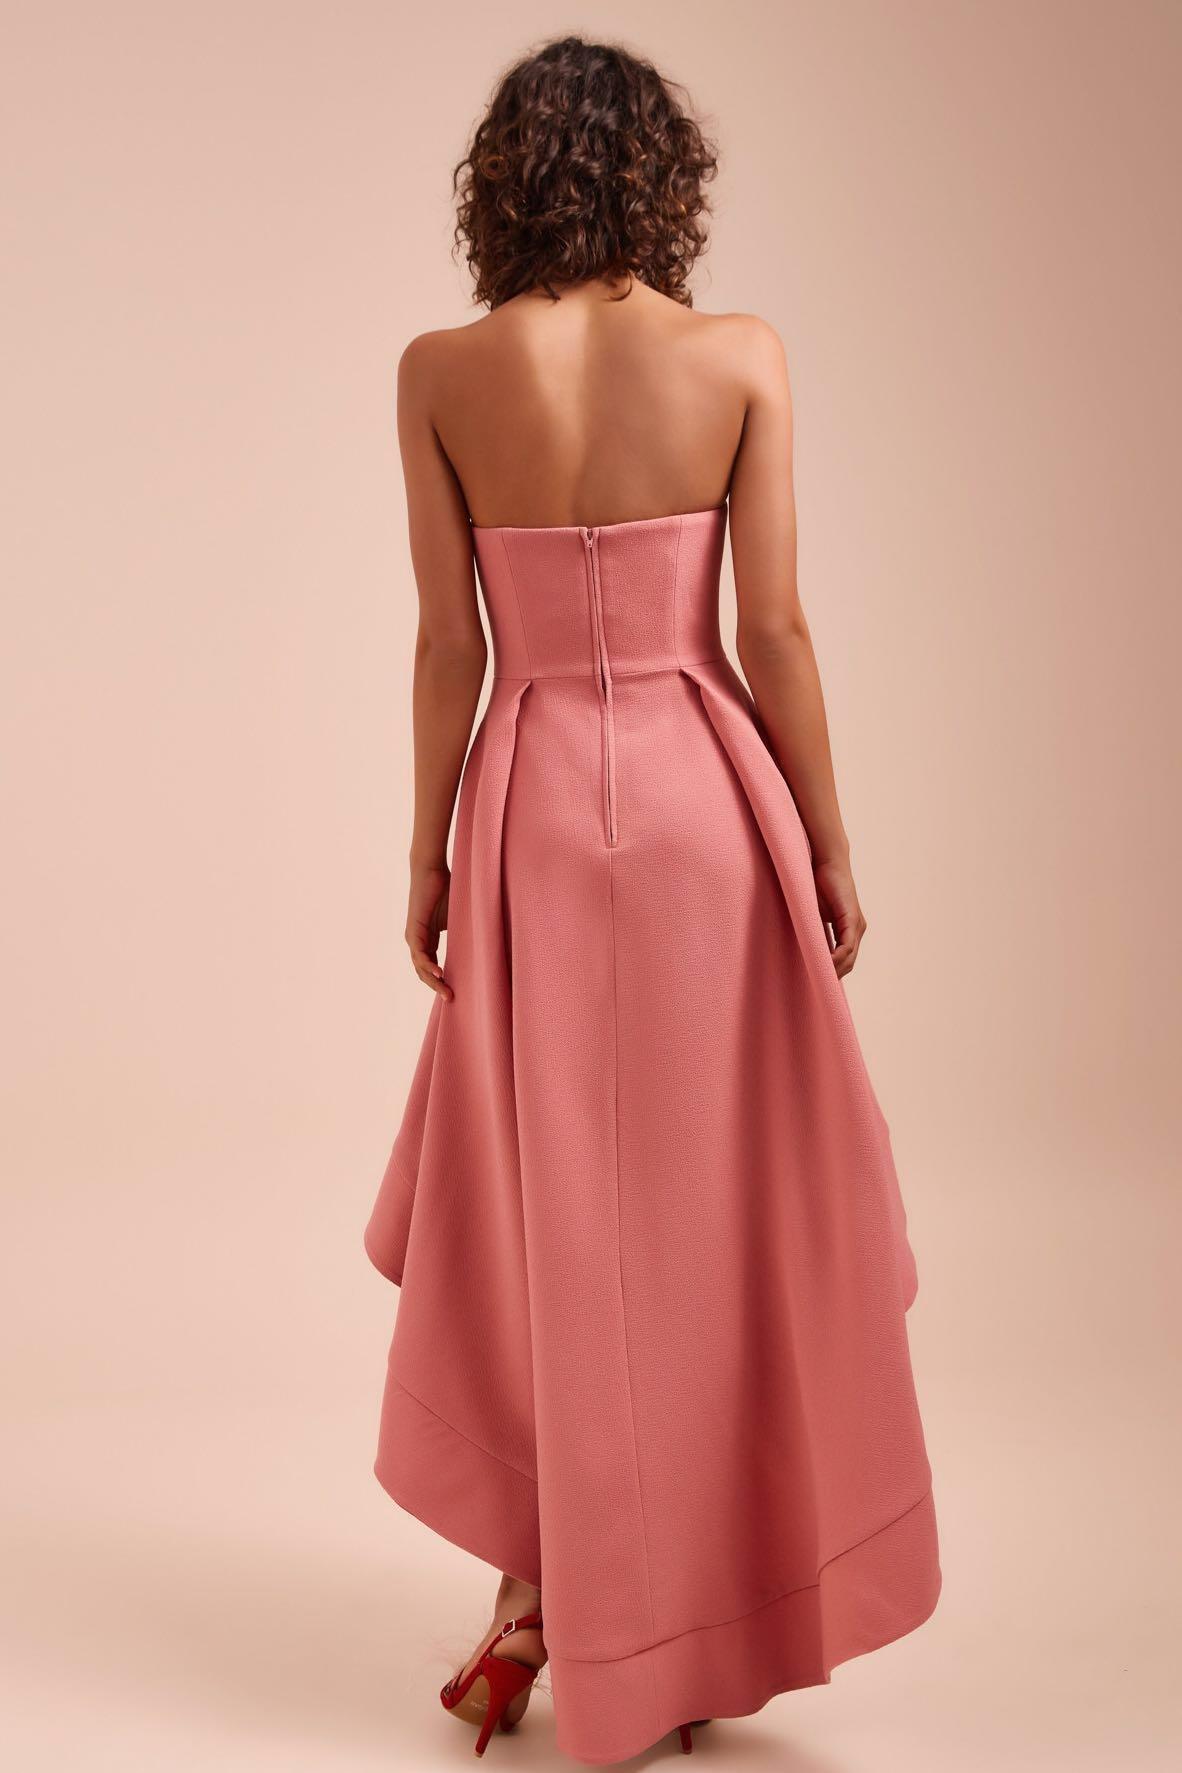 C/MEO Collective Entice Strapless Gown